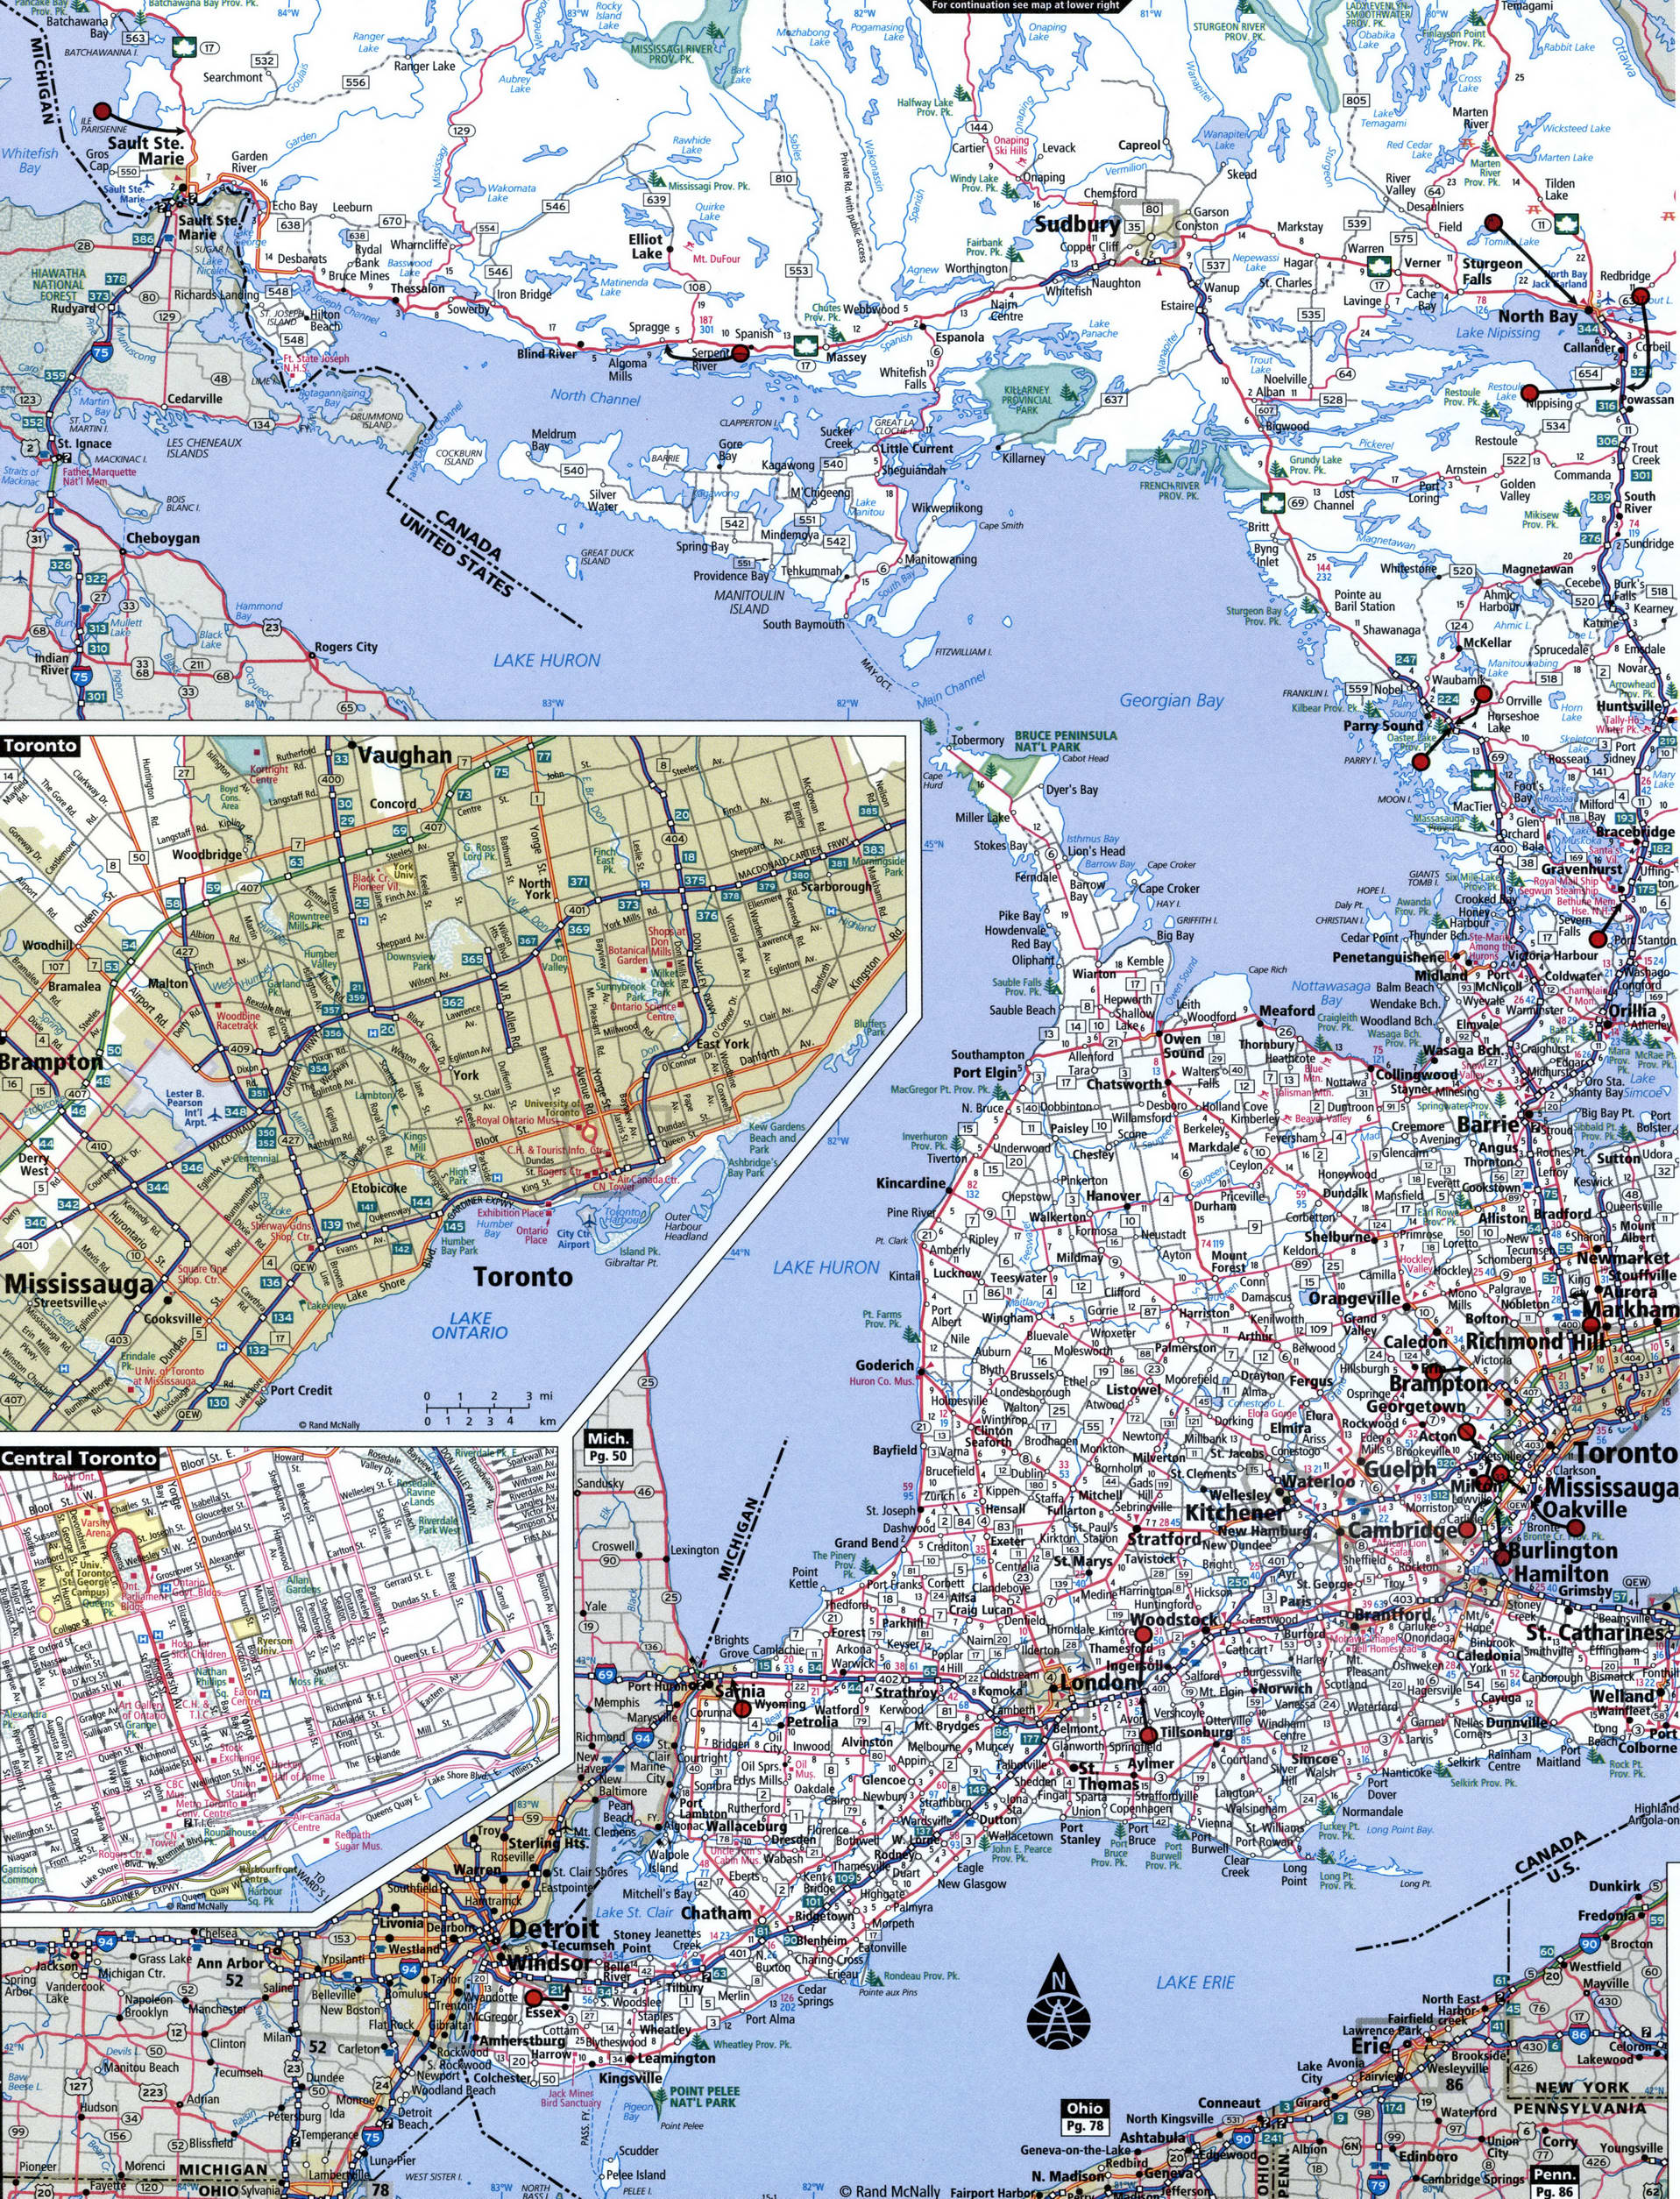 Ontario province map for truckers